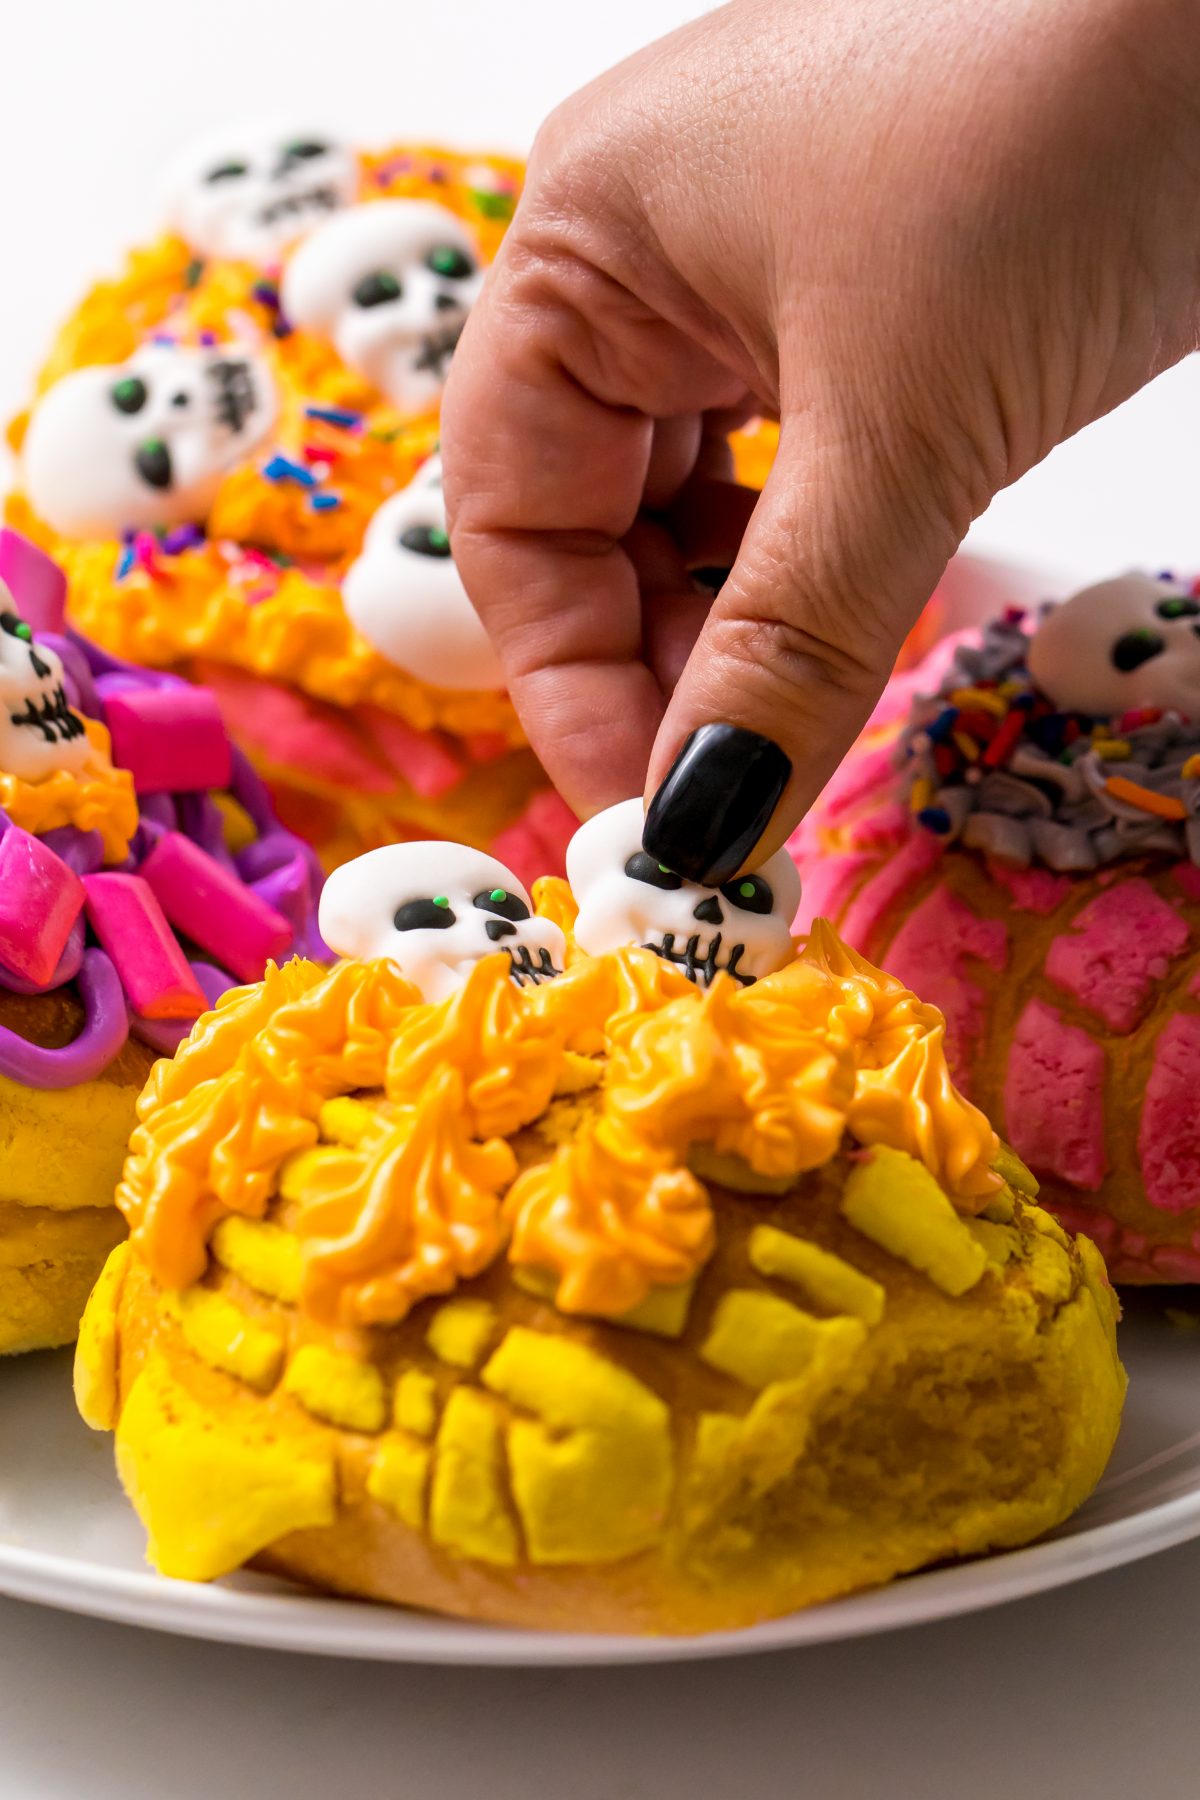 5D4B6518 - Crafty Chica - Day of the Dead Conchas - placing candy skull onto frosted concha